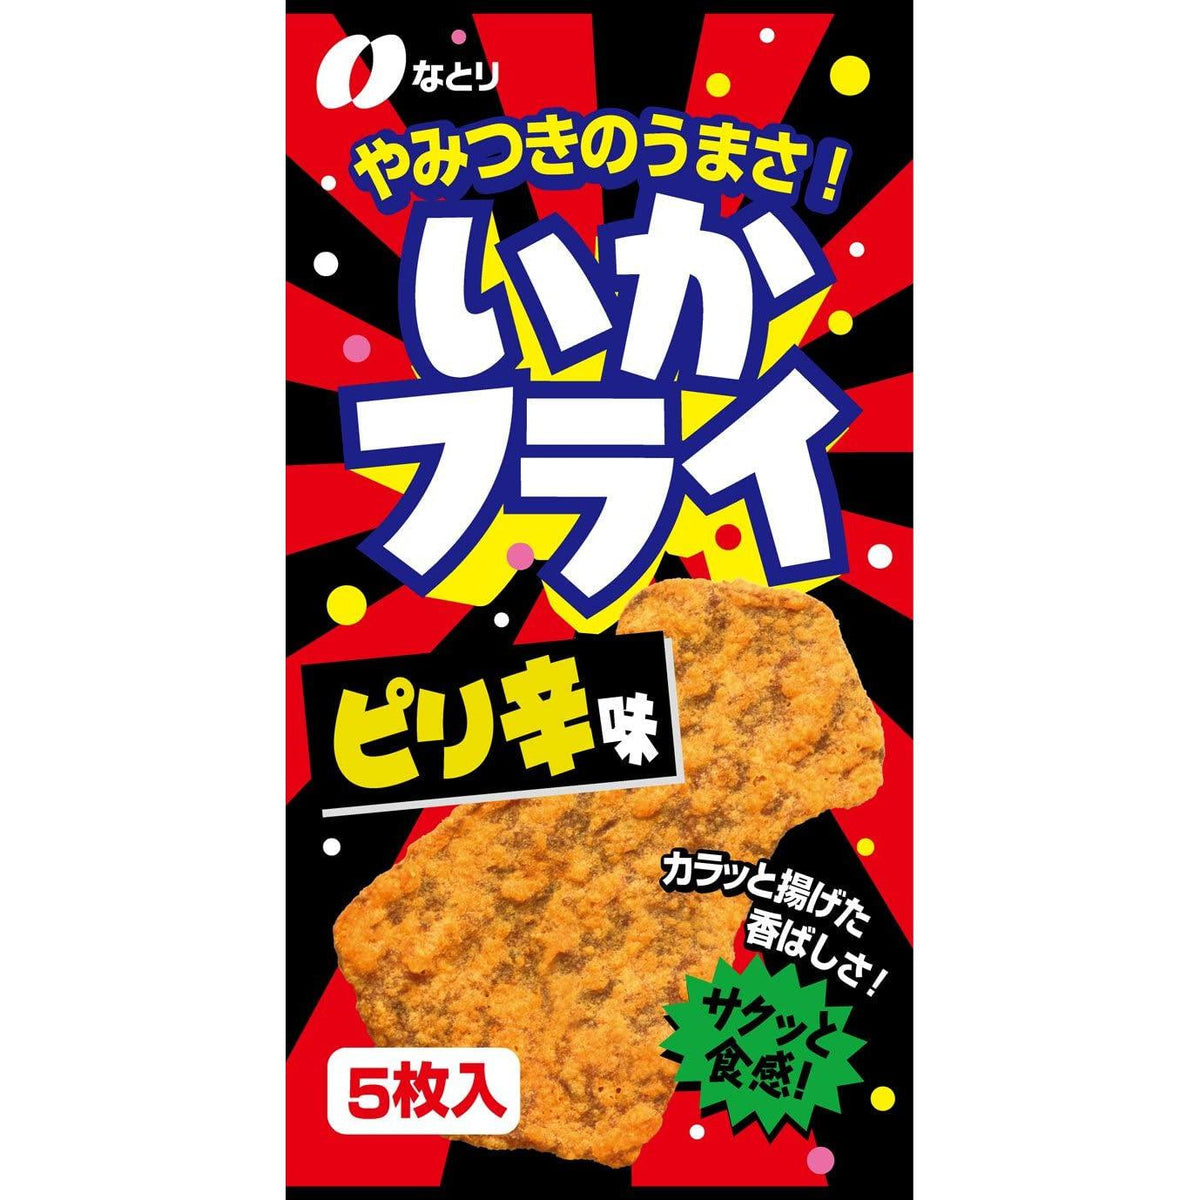 Natori Ika Fry Spicy Batter Fried Squid Snack 5 Pieces – Japanese